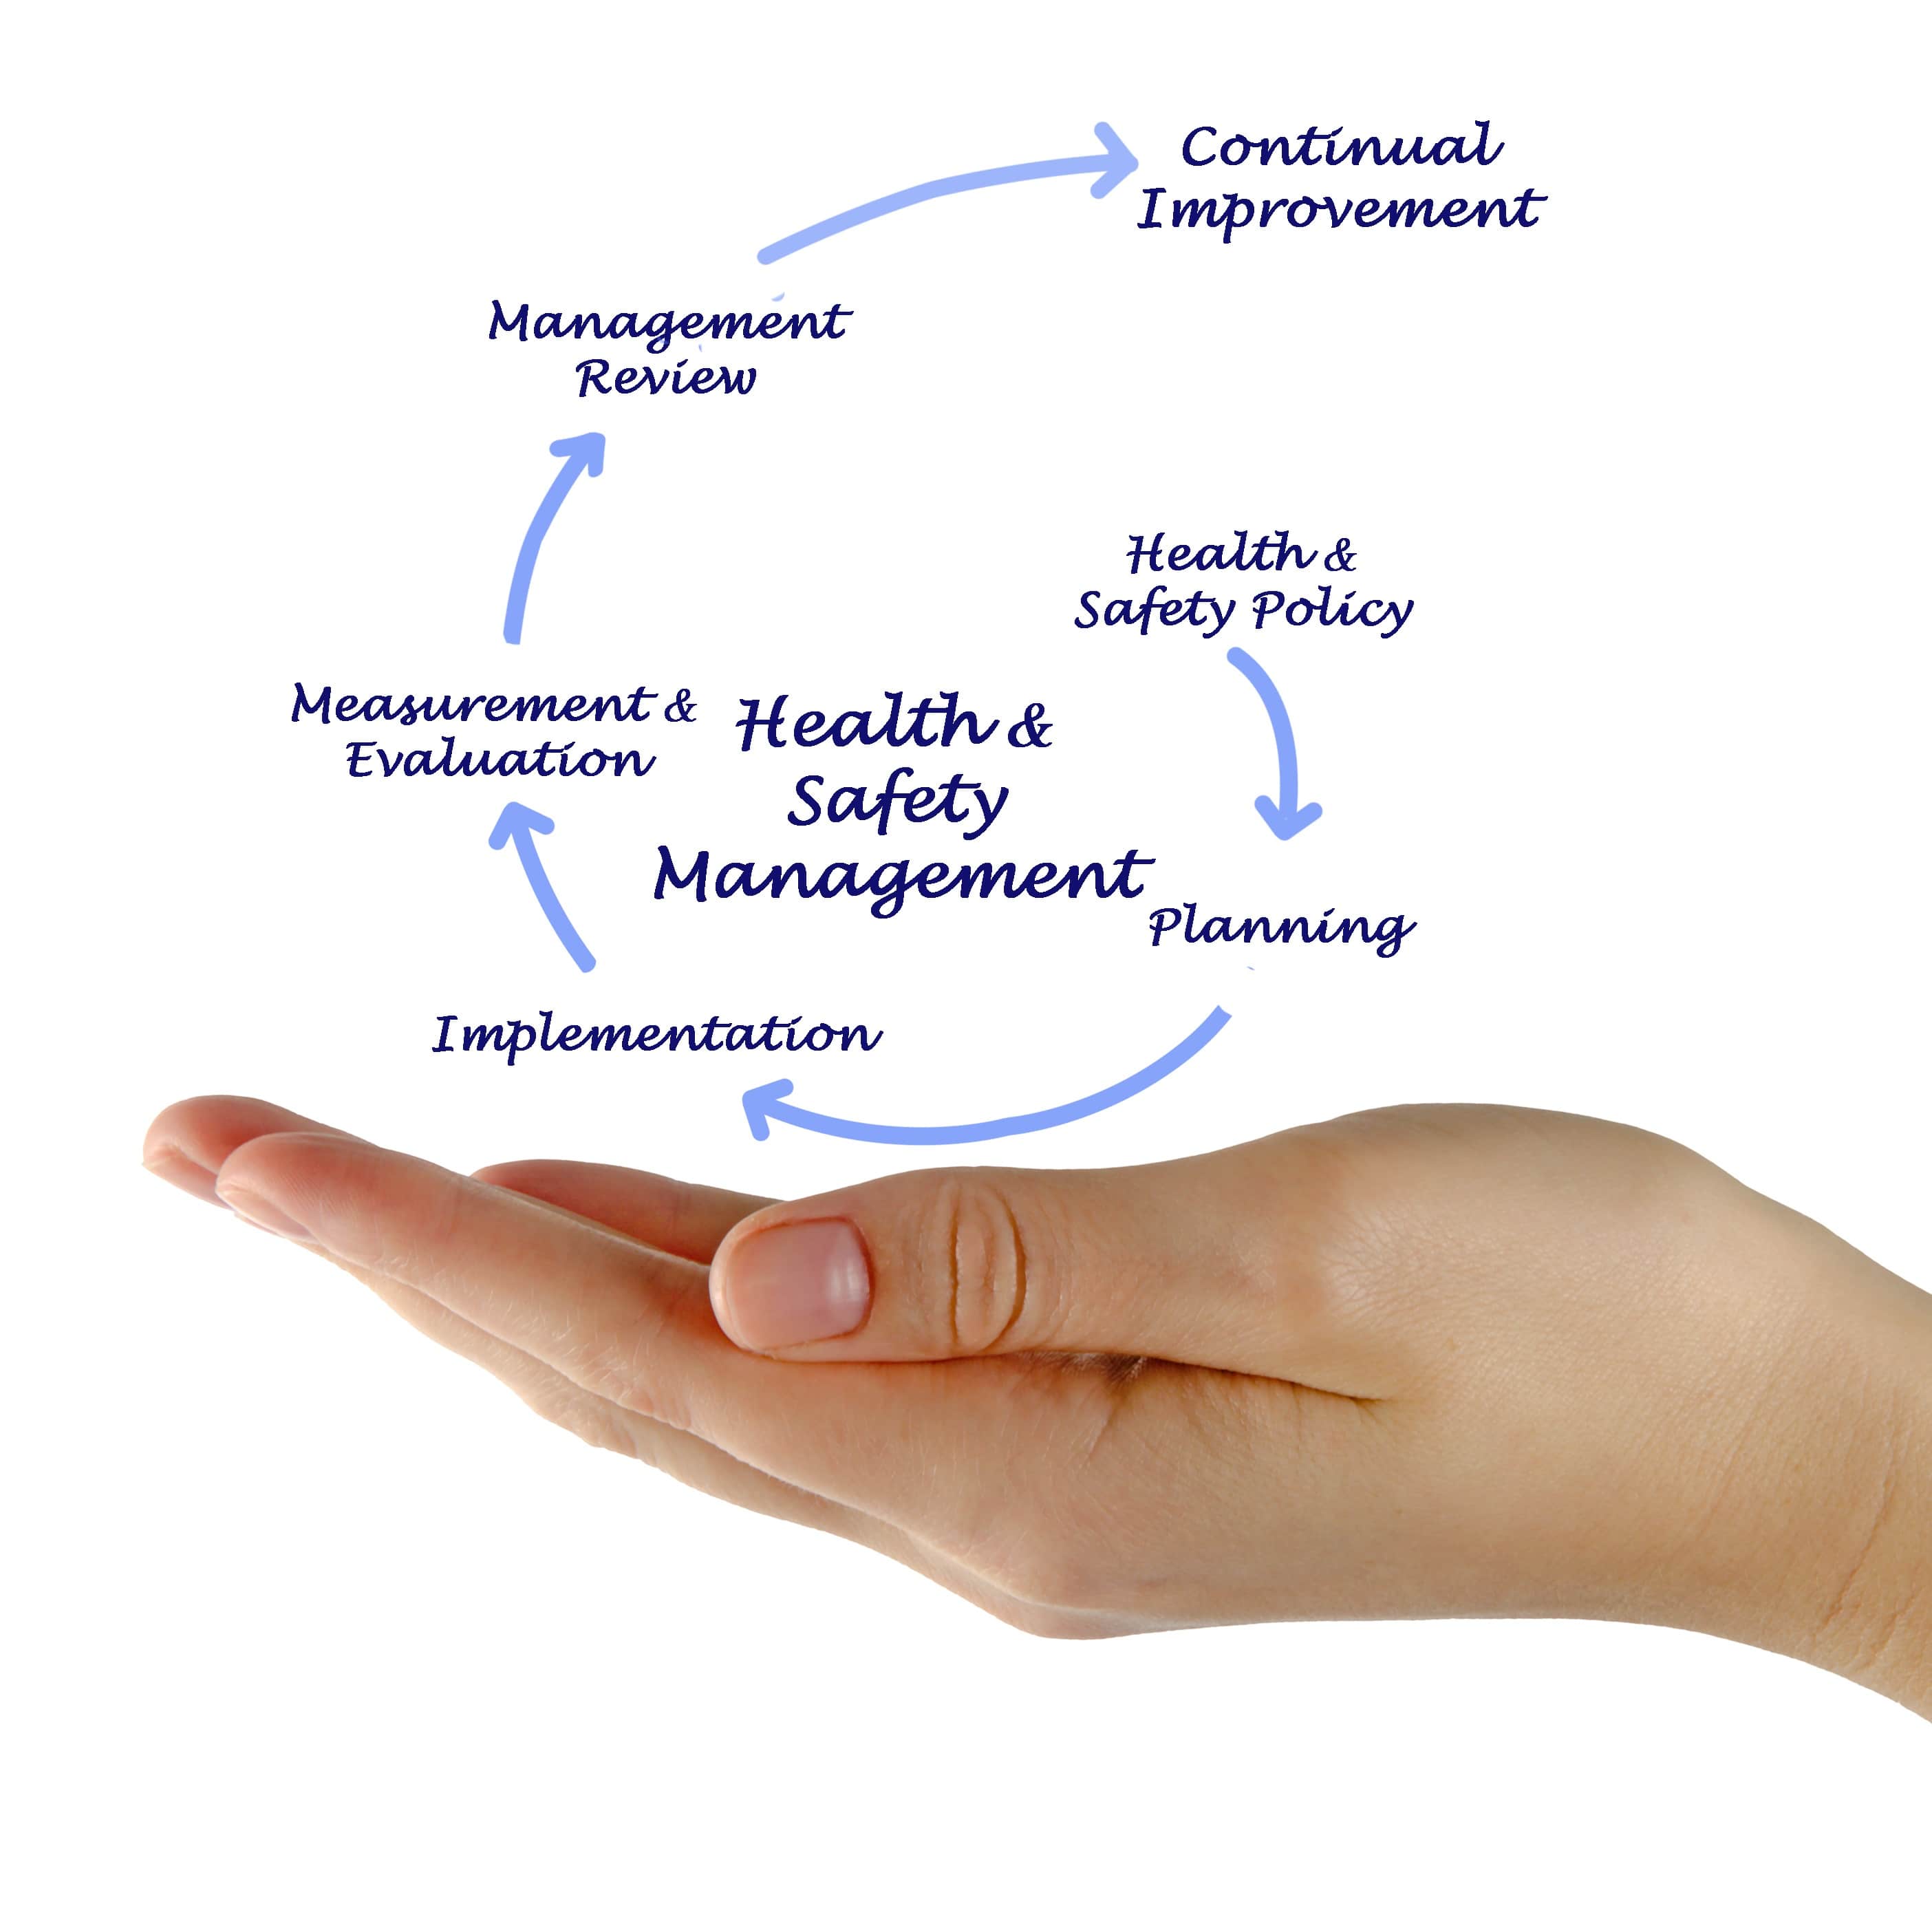 image of health and safety management diagram above a cupped hand